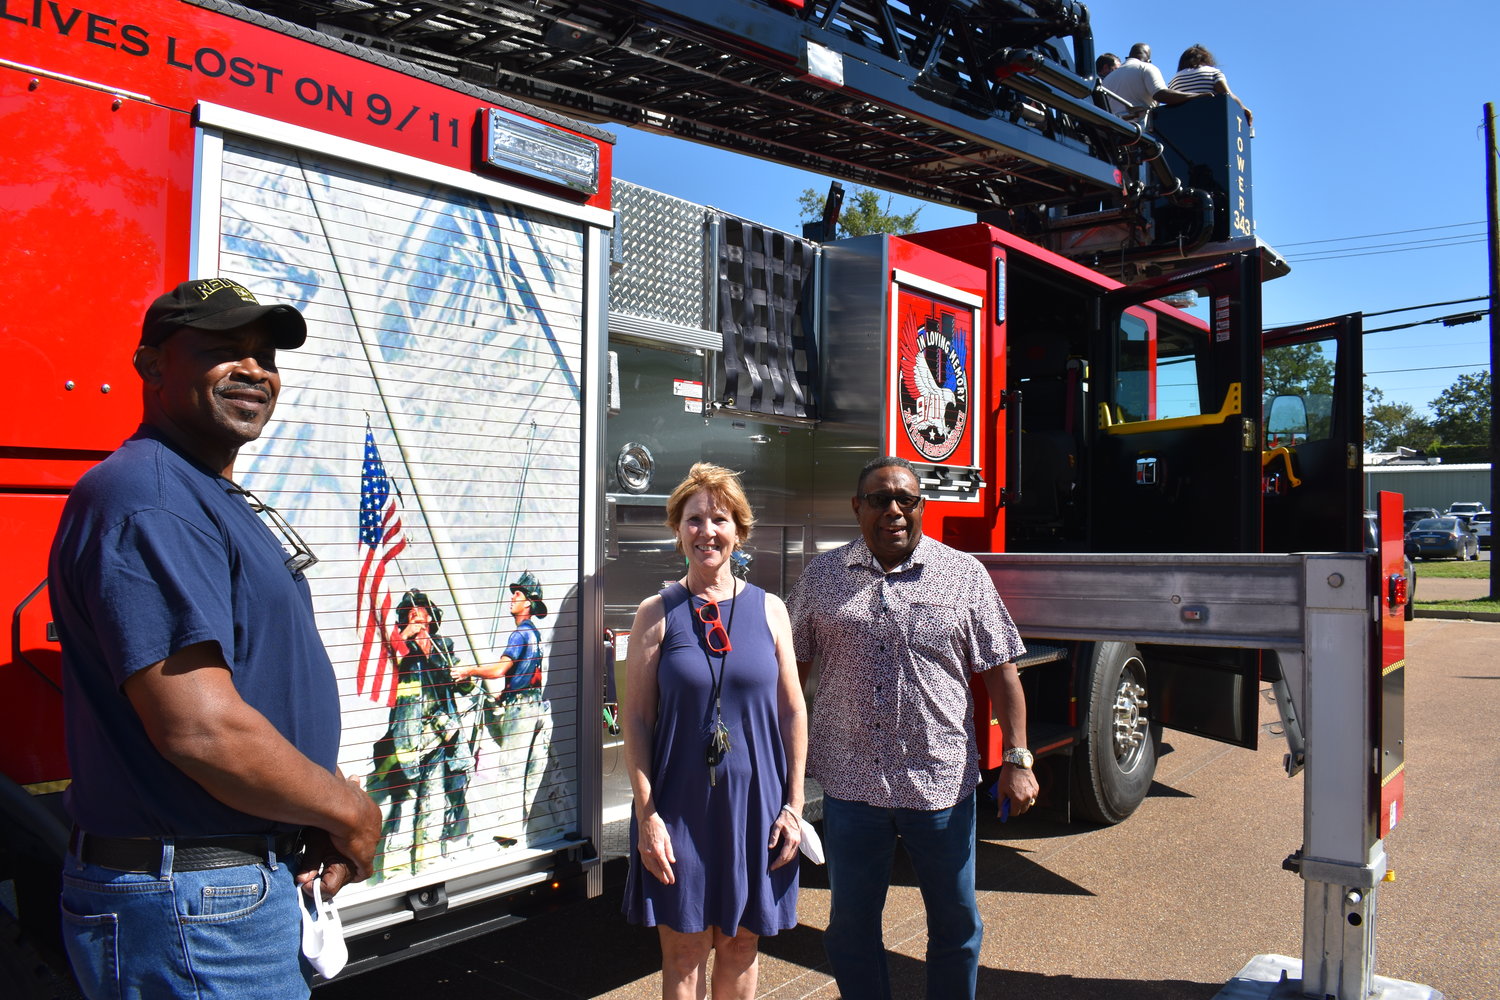 Madison County Supervisors Paul Griffin, Sheila Jones and Karl Banks stand in front of the county’s new $1.4 million fire truck that features memorialized images of 9/11. The truck was purchased in part with $750,000 in state money.